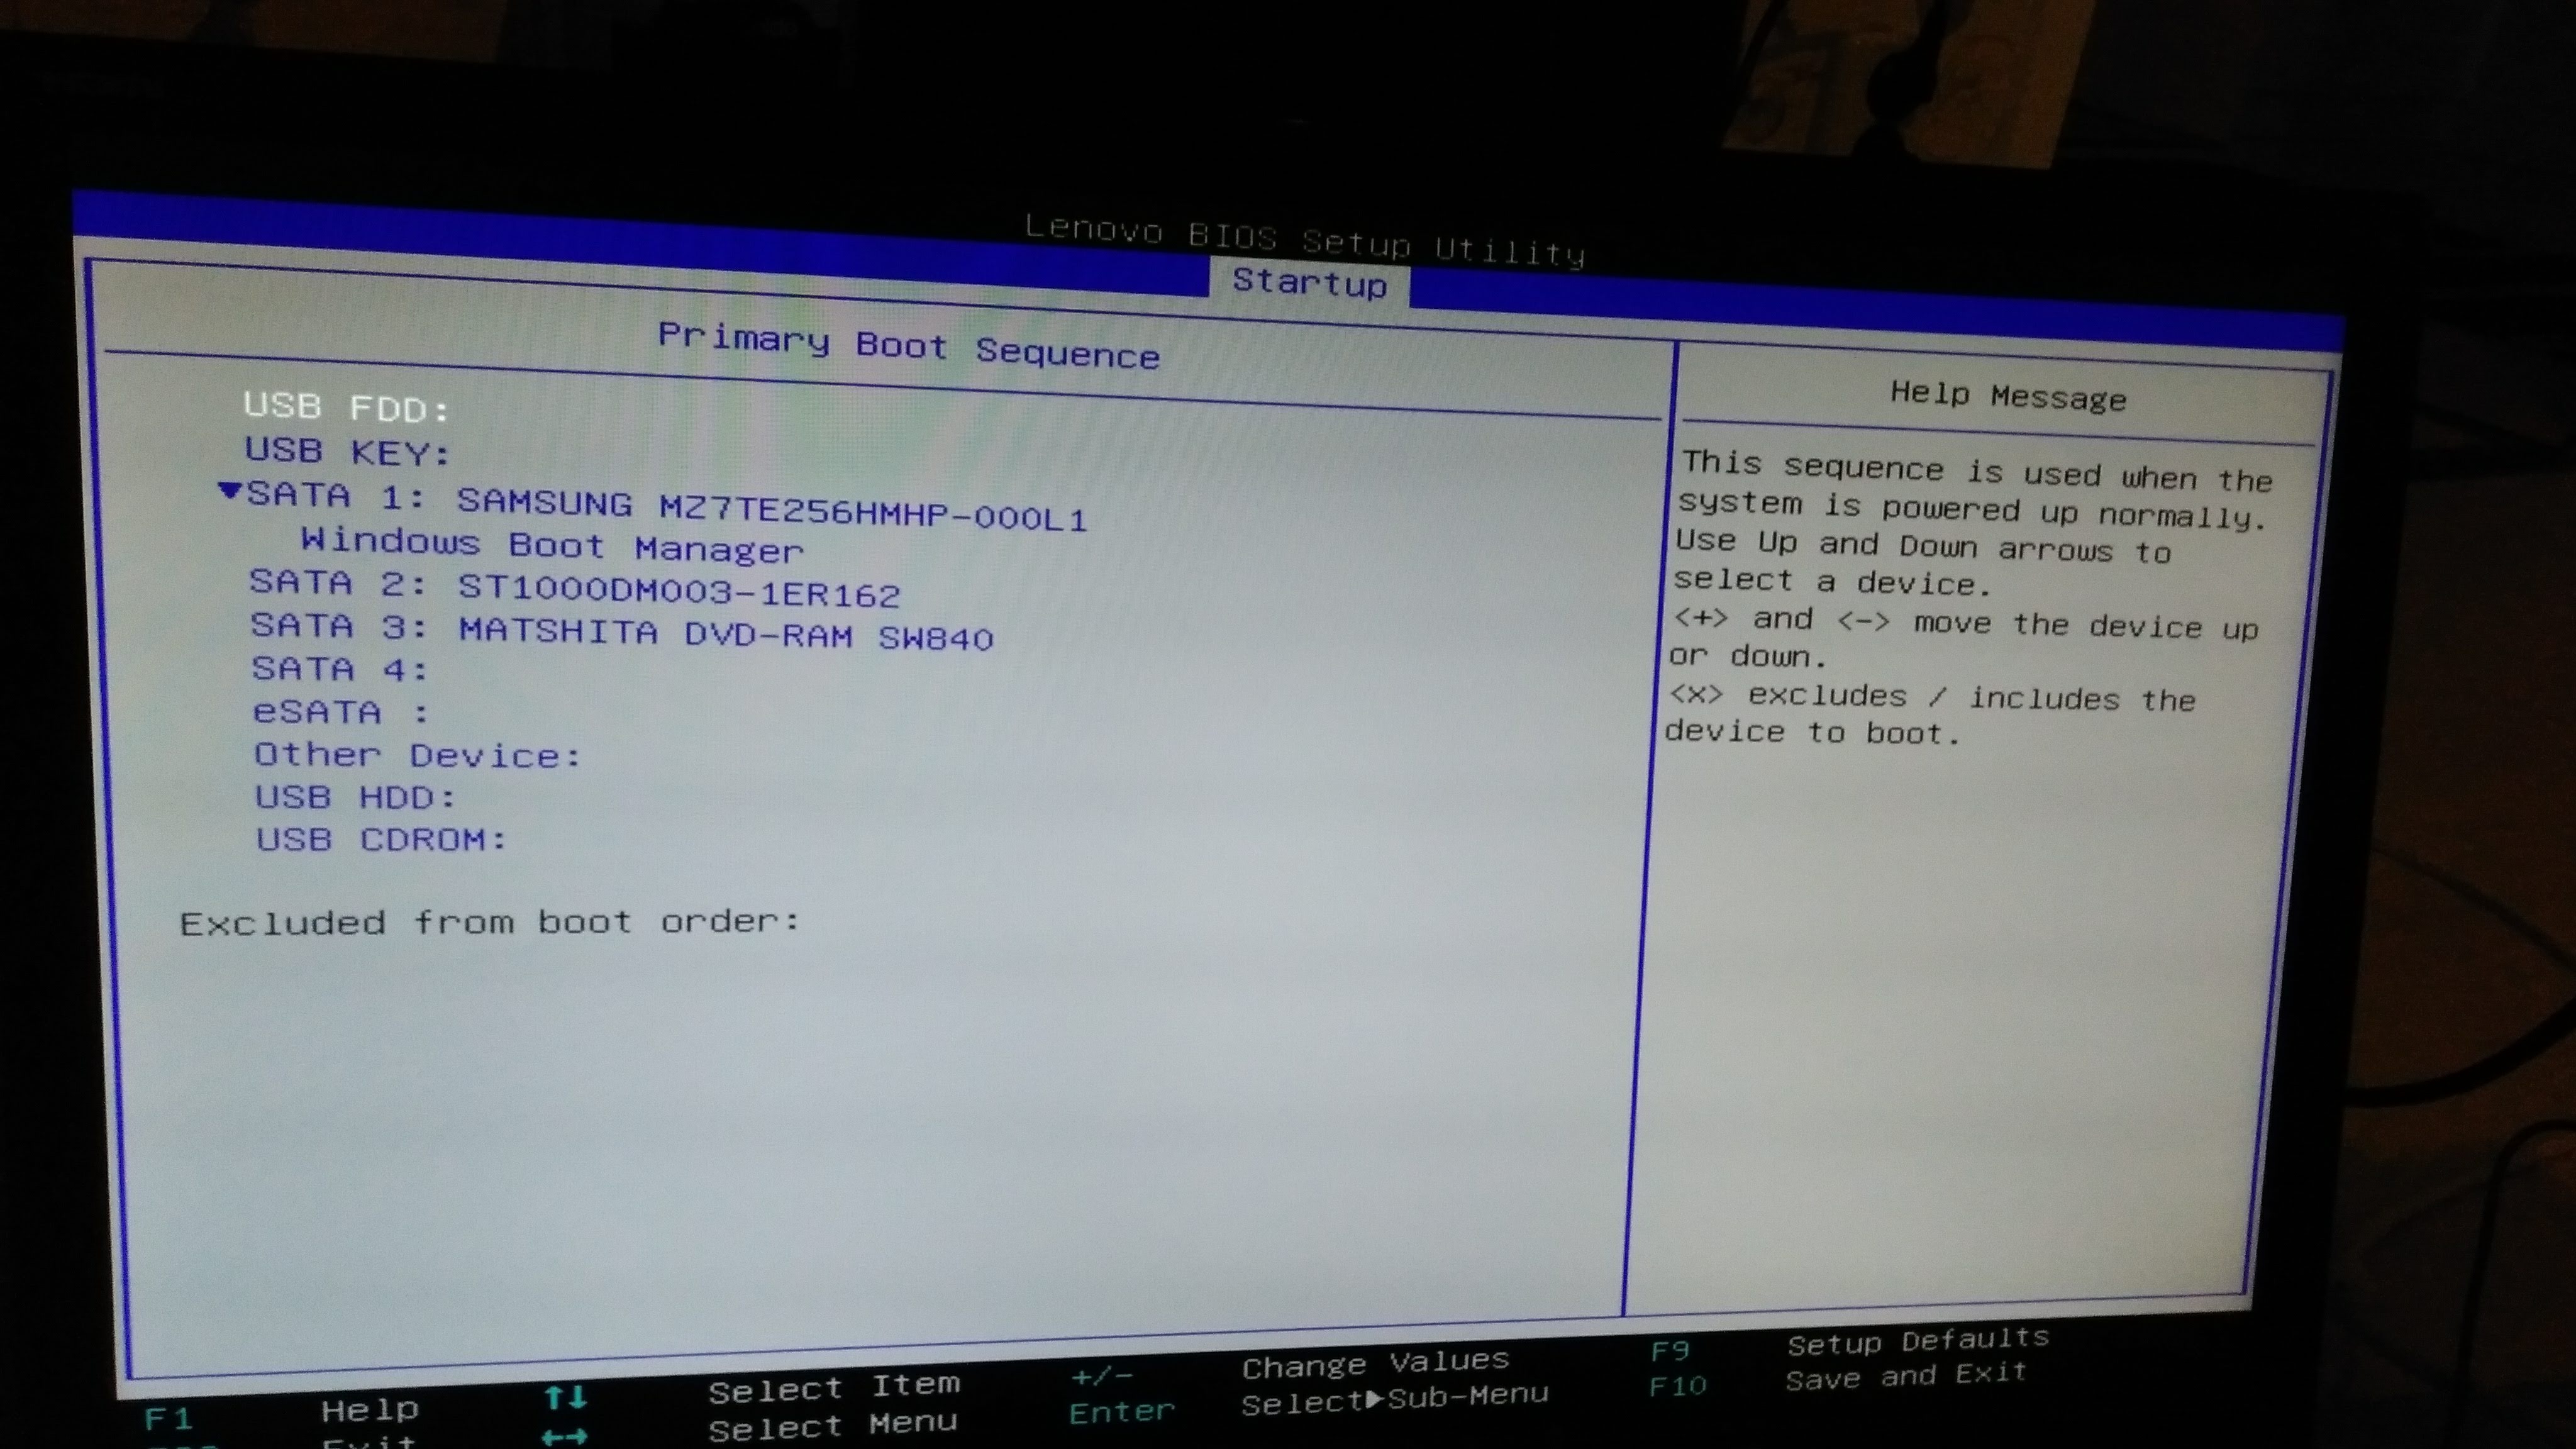 BIOS - startup - Primary Boot Sequence